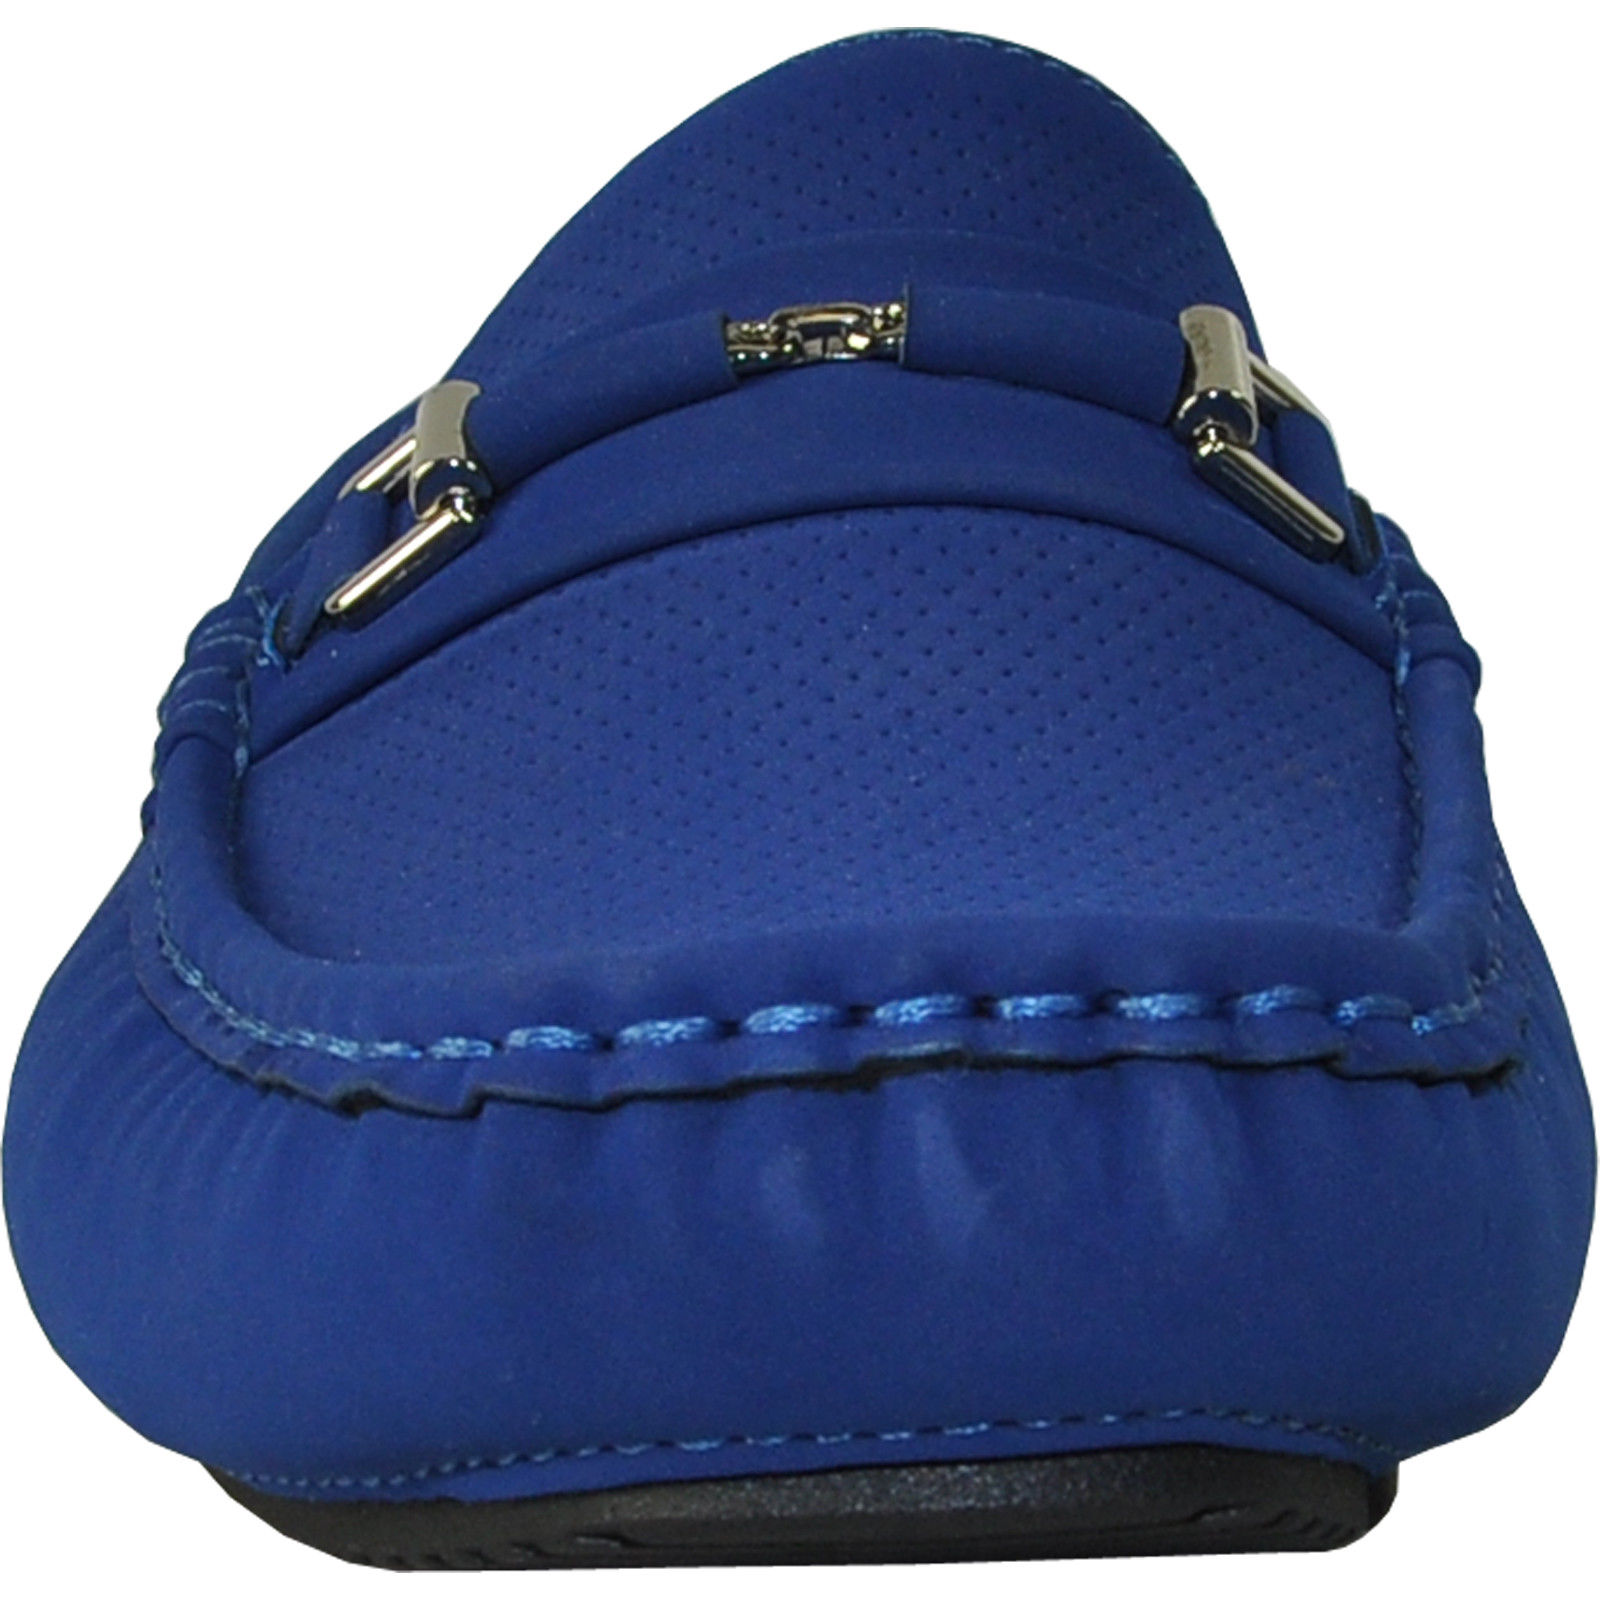 Bravo! Men Casual Shoe Todd-1 Driving Moccasin Blue 13M US - image 2 of 7